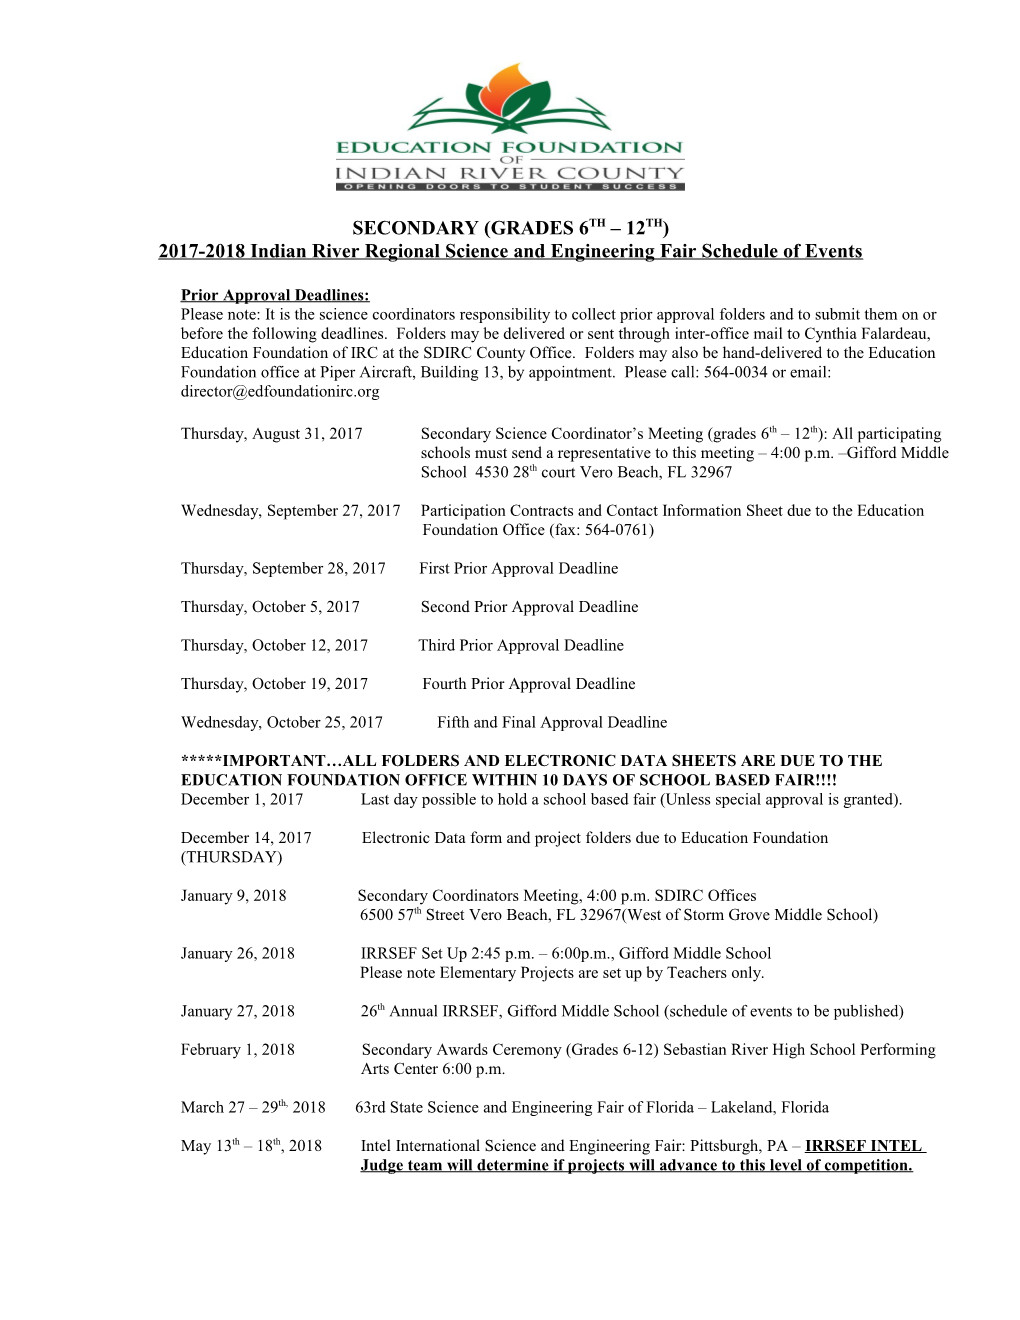 Indian River Regional Science and Engineering Fair Schedule of Events